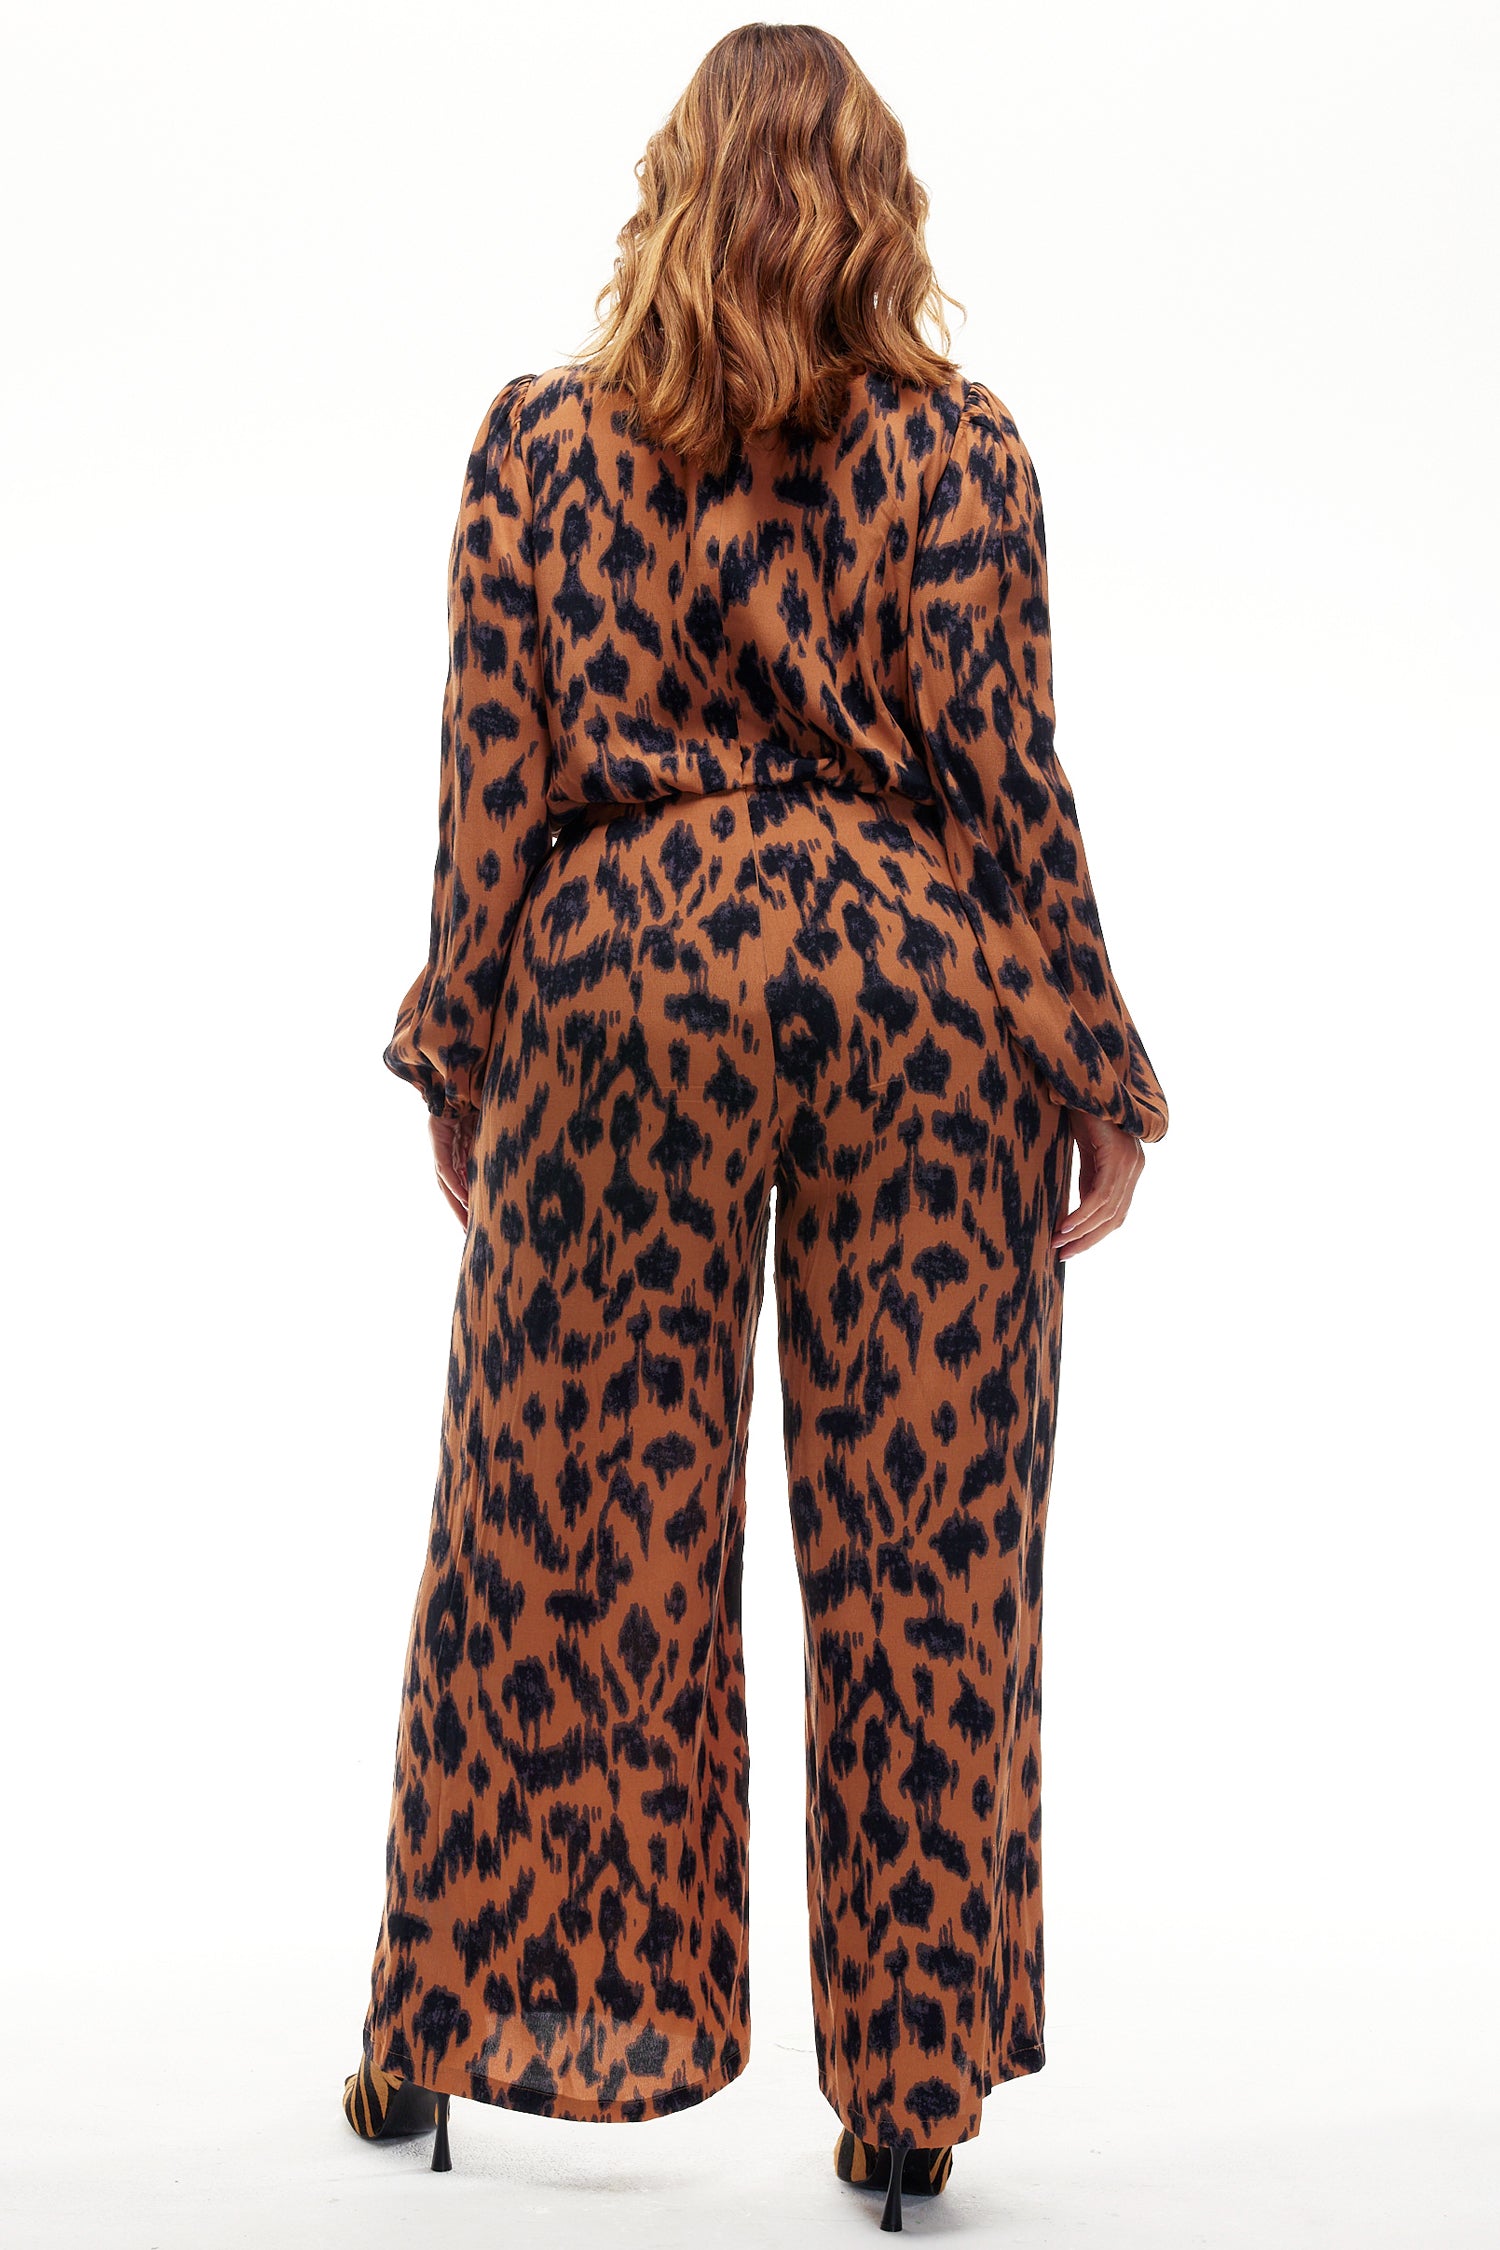 Model wearing Animal Jumpsuit standing facing away from the camera